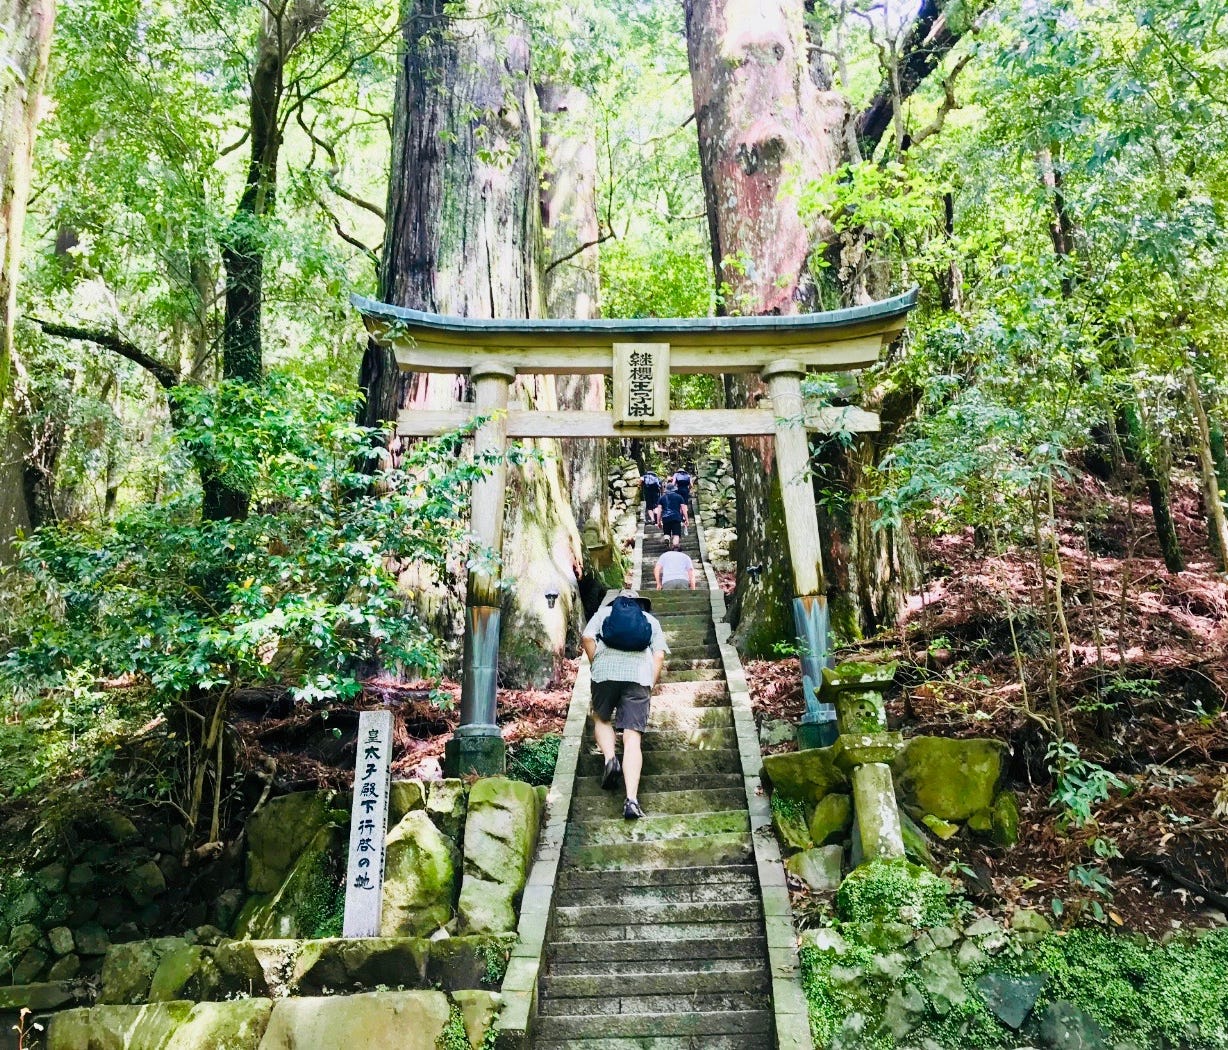 To reach the three grand shrines on foot, hikers must pass through several sub-shrines and ancient gates along the way, sometimes dotted by 800-year-old cedar trees.